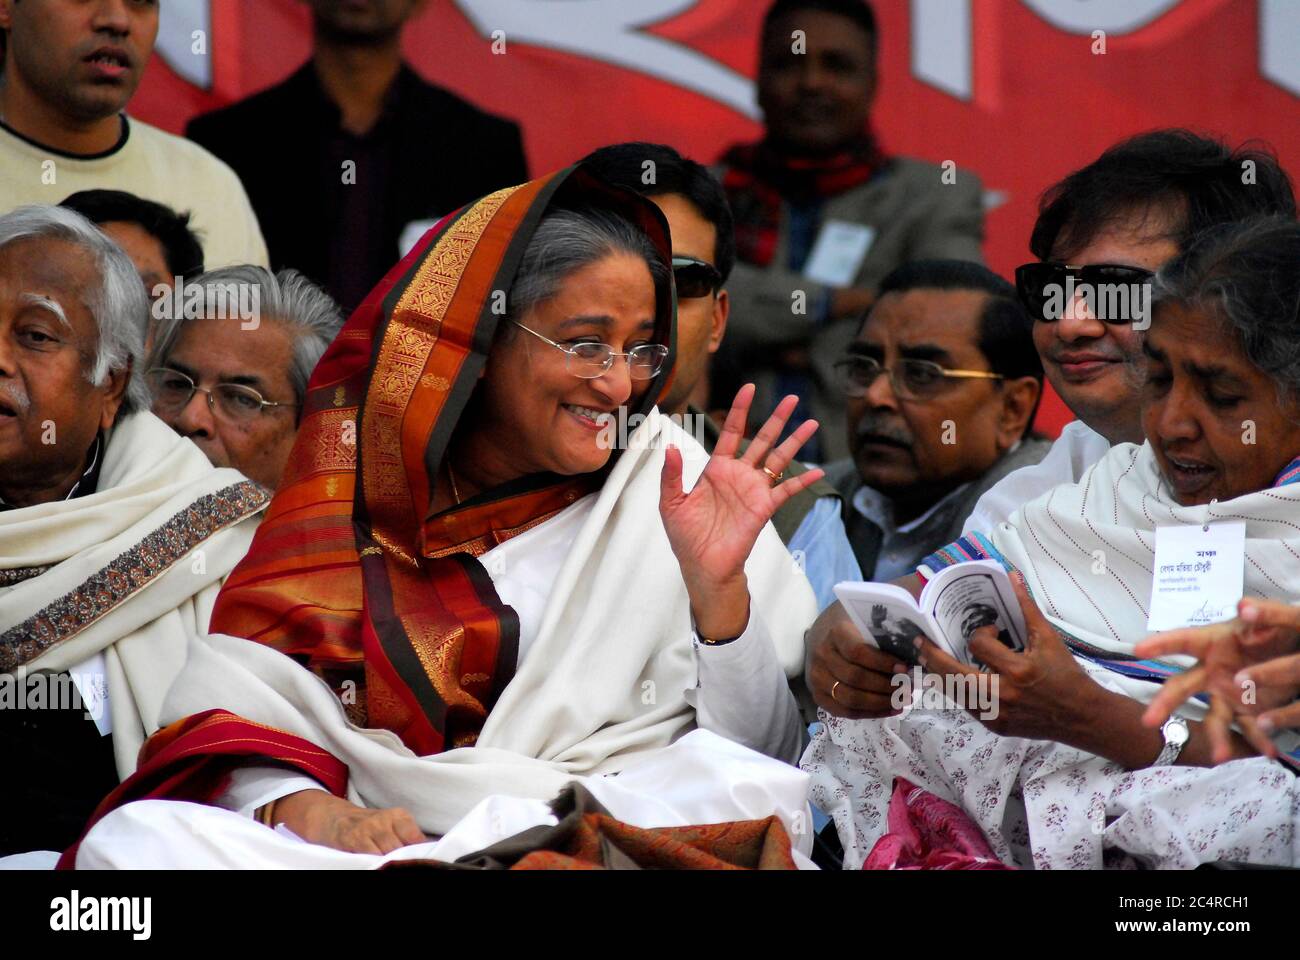 Awami League chief Sheikh Hasina announced a serious of tough protest programe from a rally organized by 14 party alliances. Former presidents HM Ershad and Badruddoza Chowdhury joined the rally, timed to mark the homecoming of independence leader Sheikh Mujibur Rahman from Pakistan in ‘72. Dhaka, Bangladesh, January 10 2007.. Stock Photo